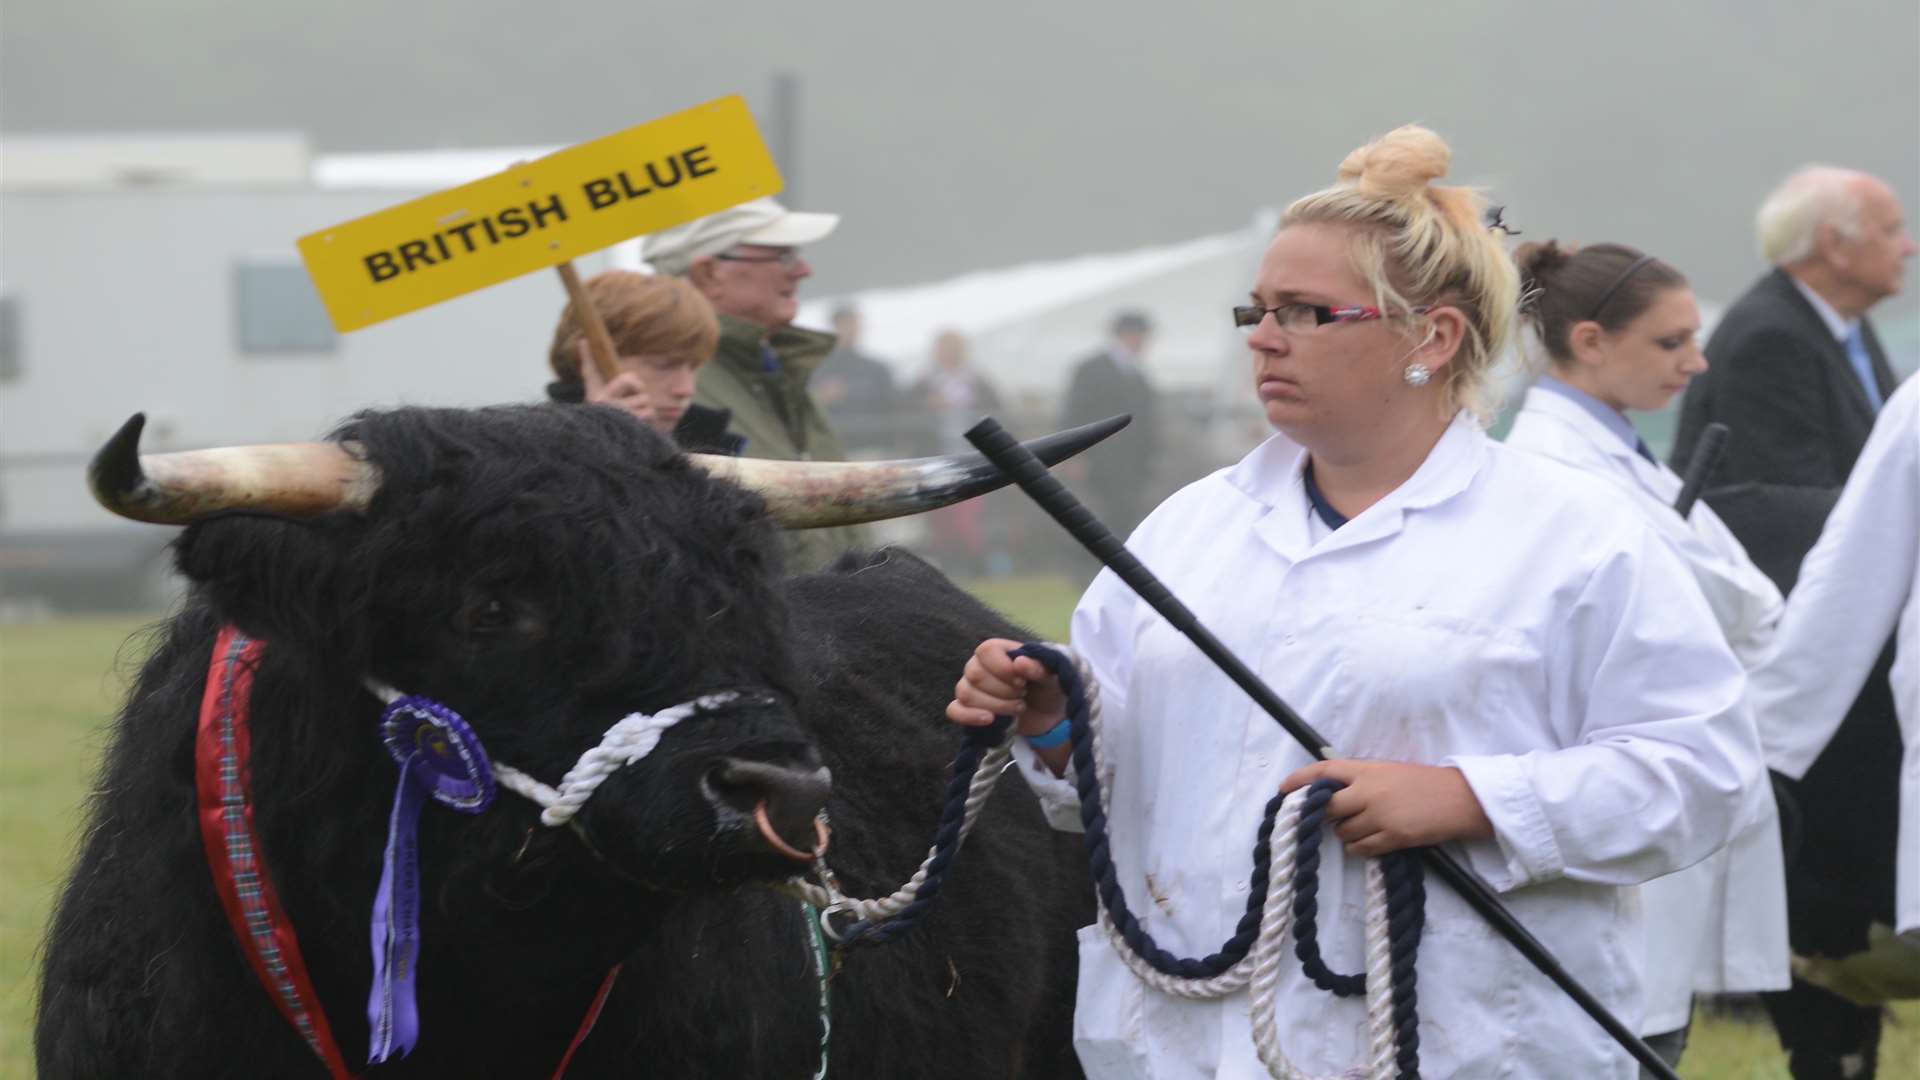 The Grand Parade of Livestock is a highlight of the show